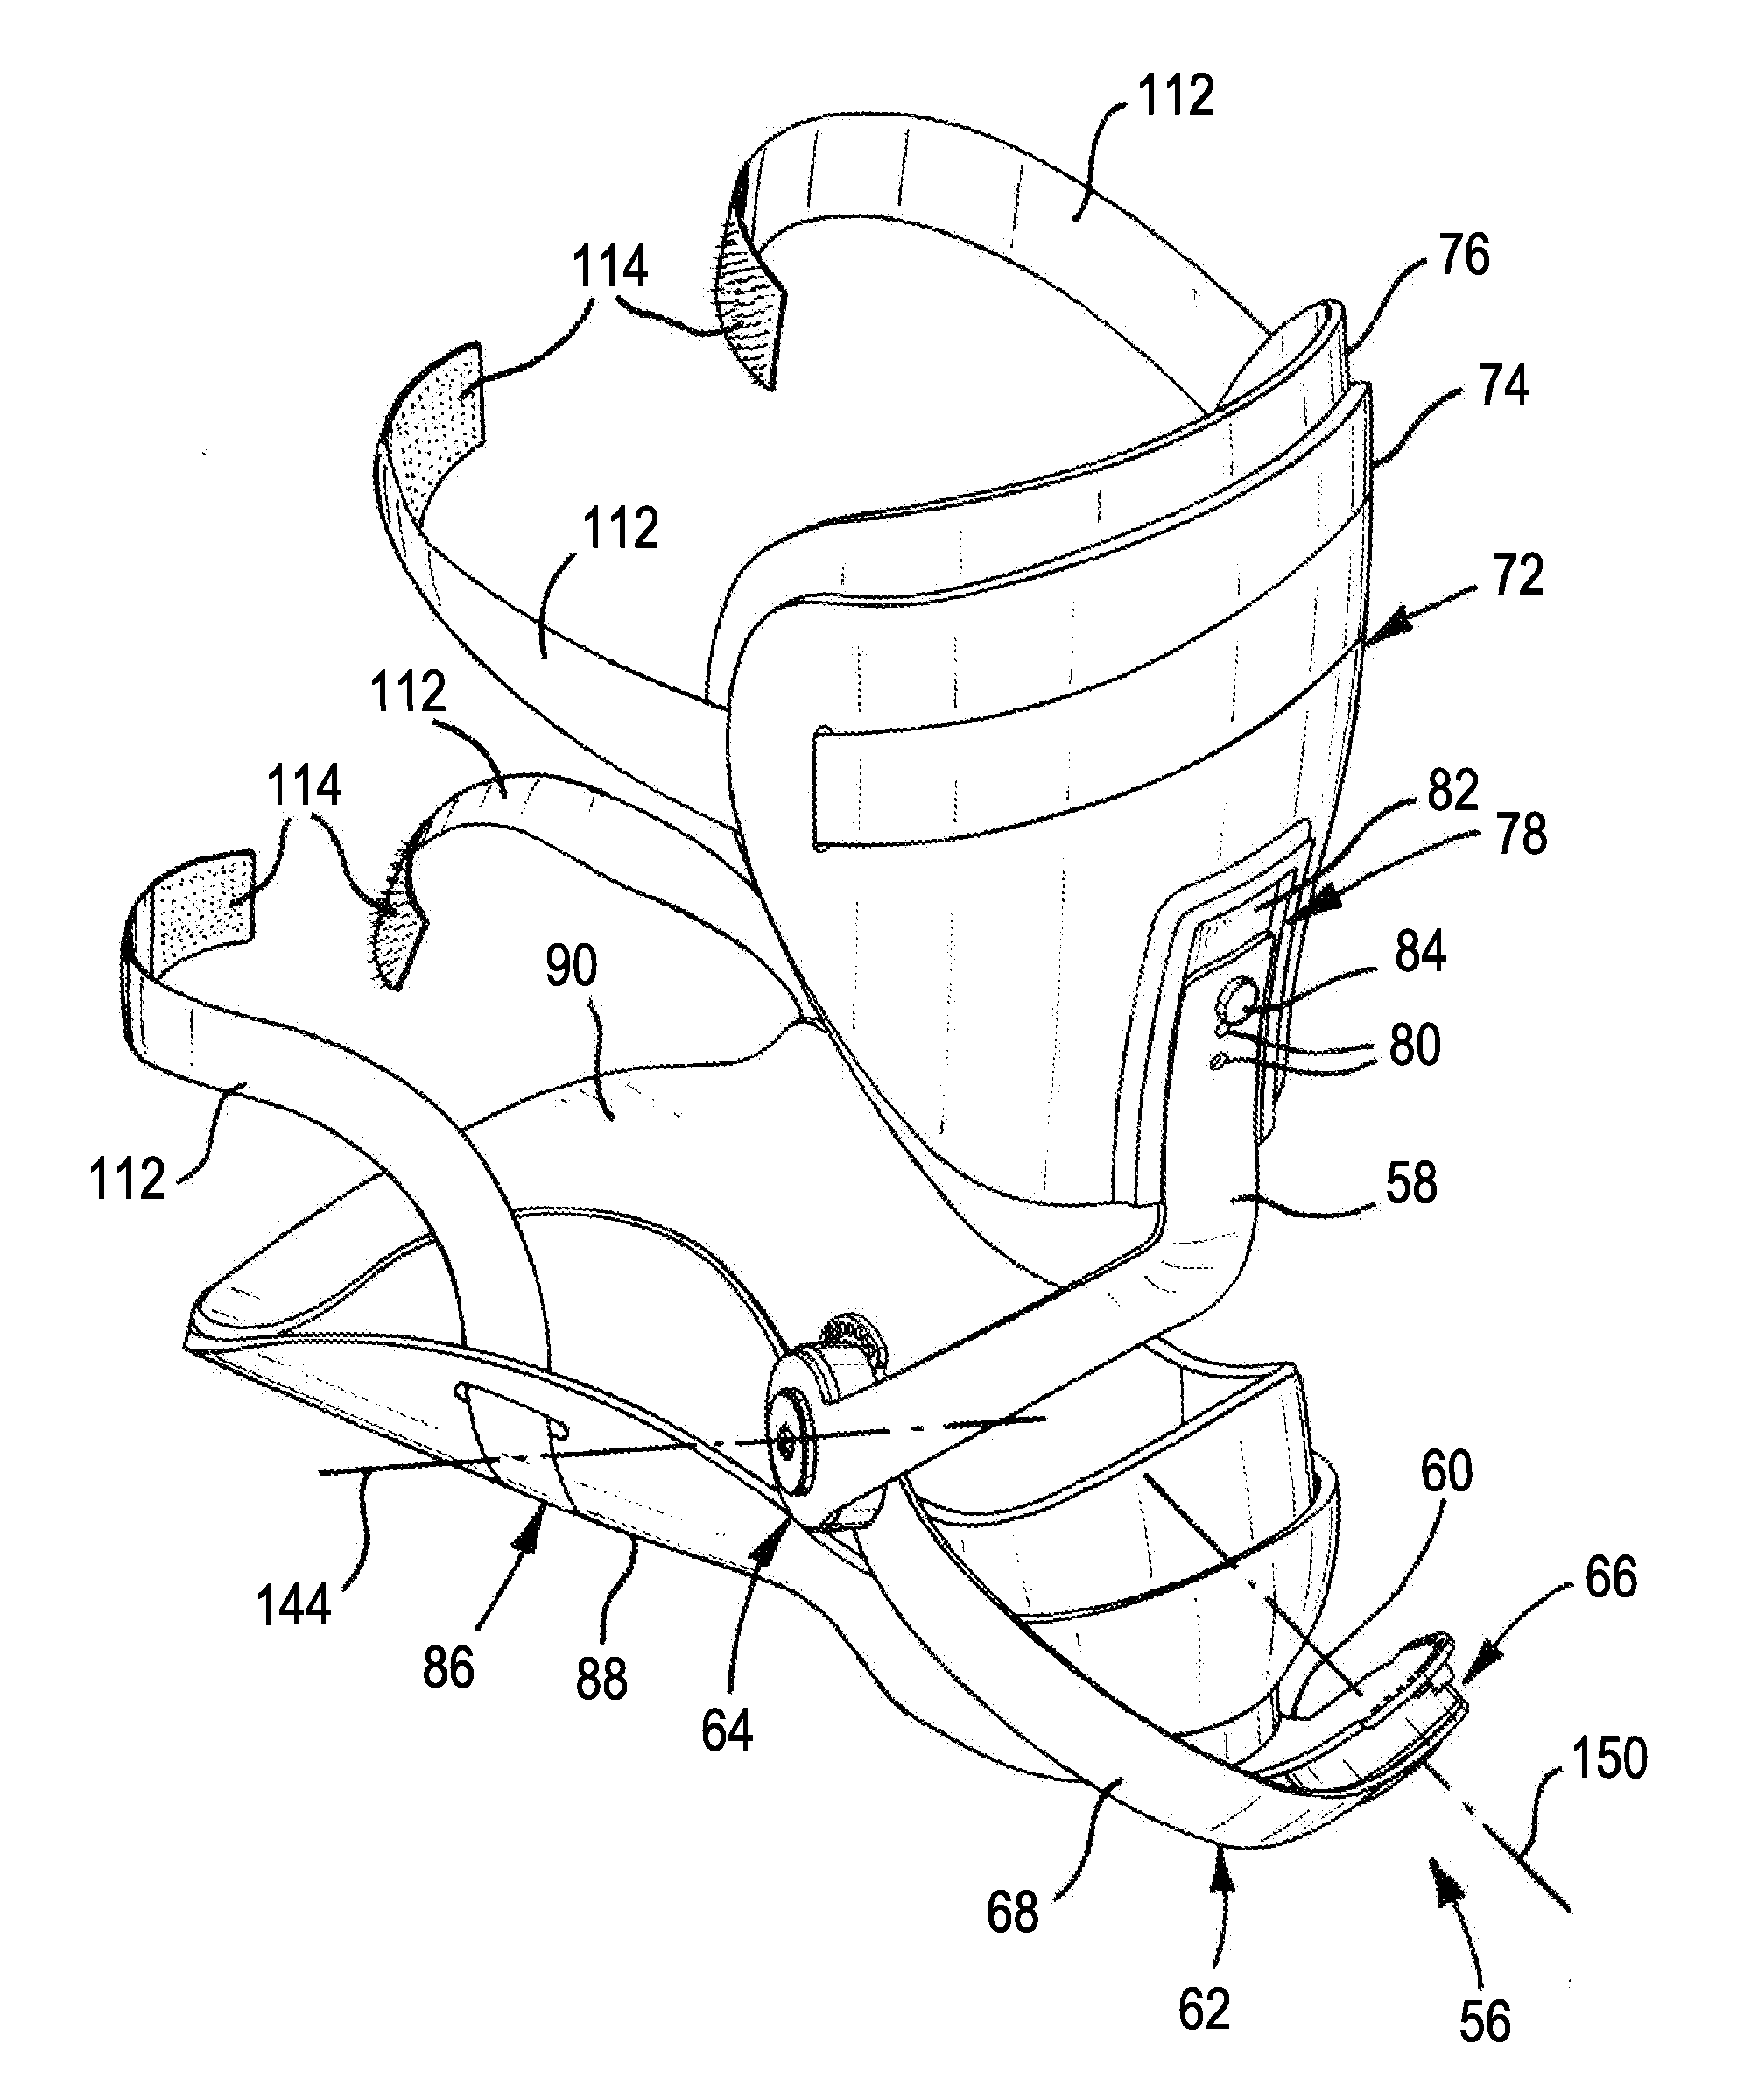 Ankle foot orthopaedic devices